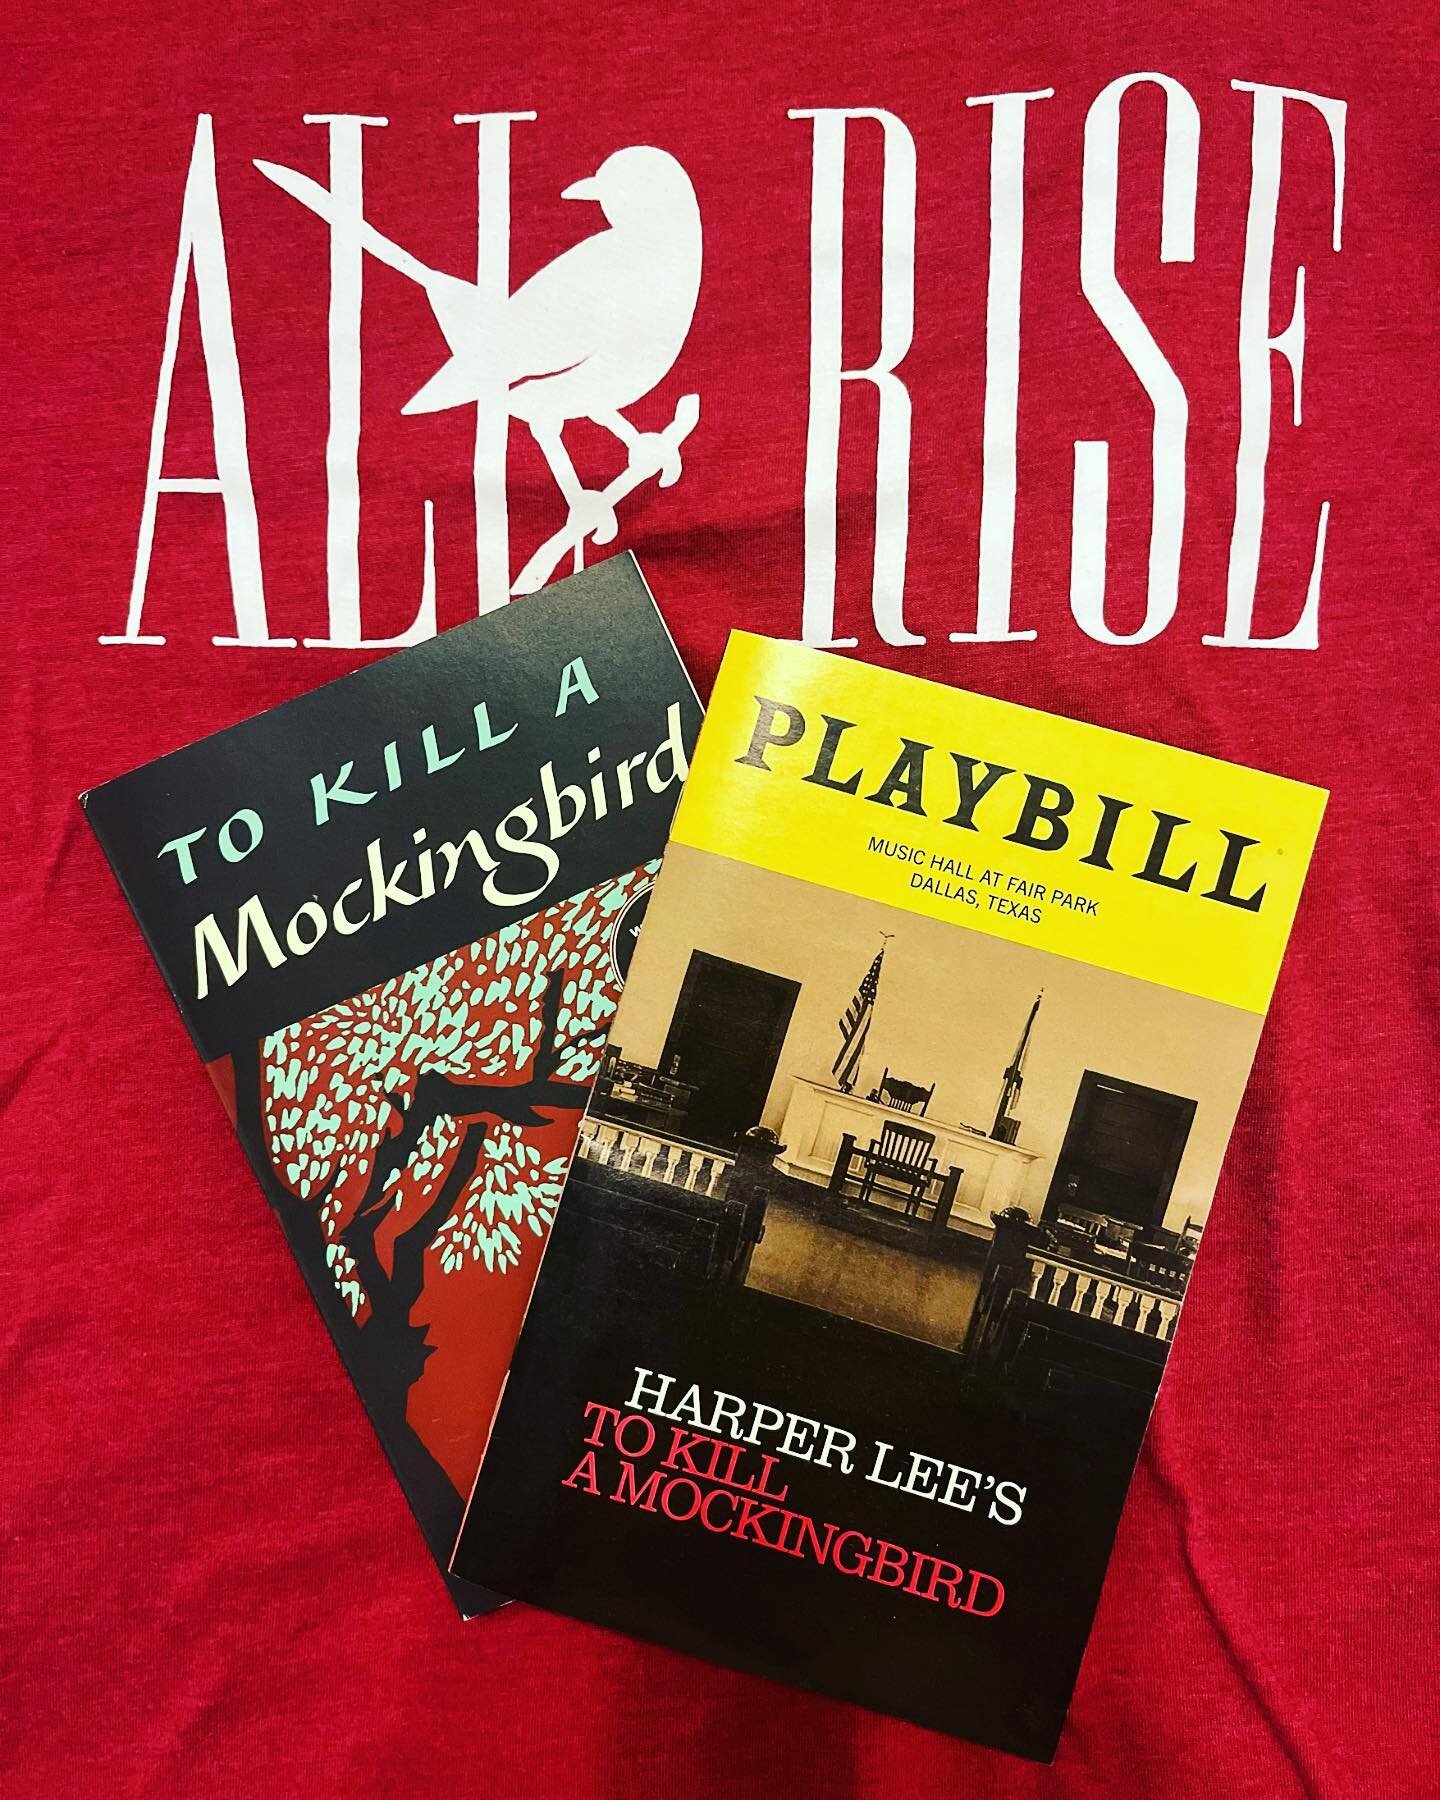 The one thing that doesn&rsquo;t abide by majority rule is a person&rsquo;s conscience.
To Kill a Mockingbird 
Harper Lee.
&bull;
What. A. Show.
&bull;
I was out way past my bedtime last night and it was it ever worth it.
&bull;
When TKAM came to the